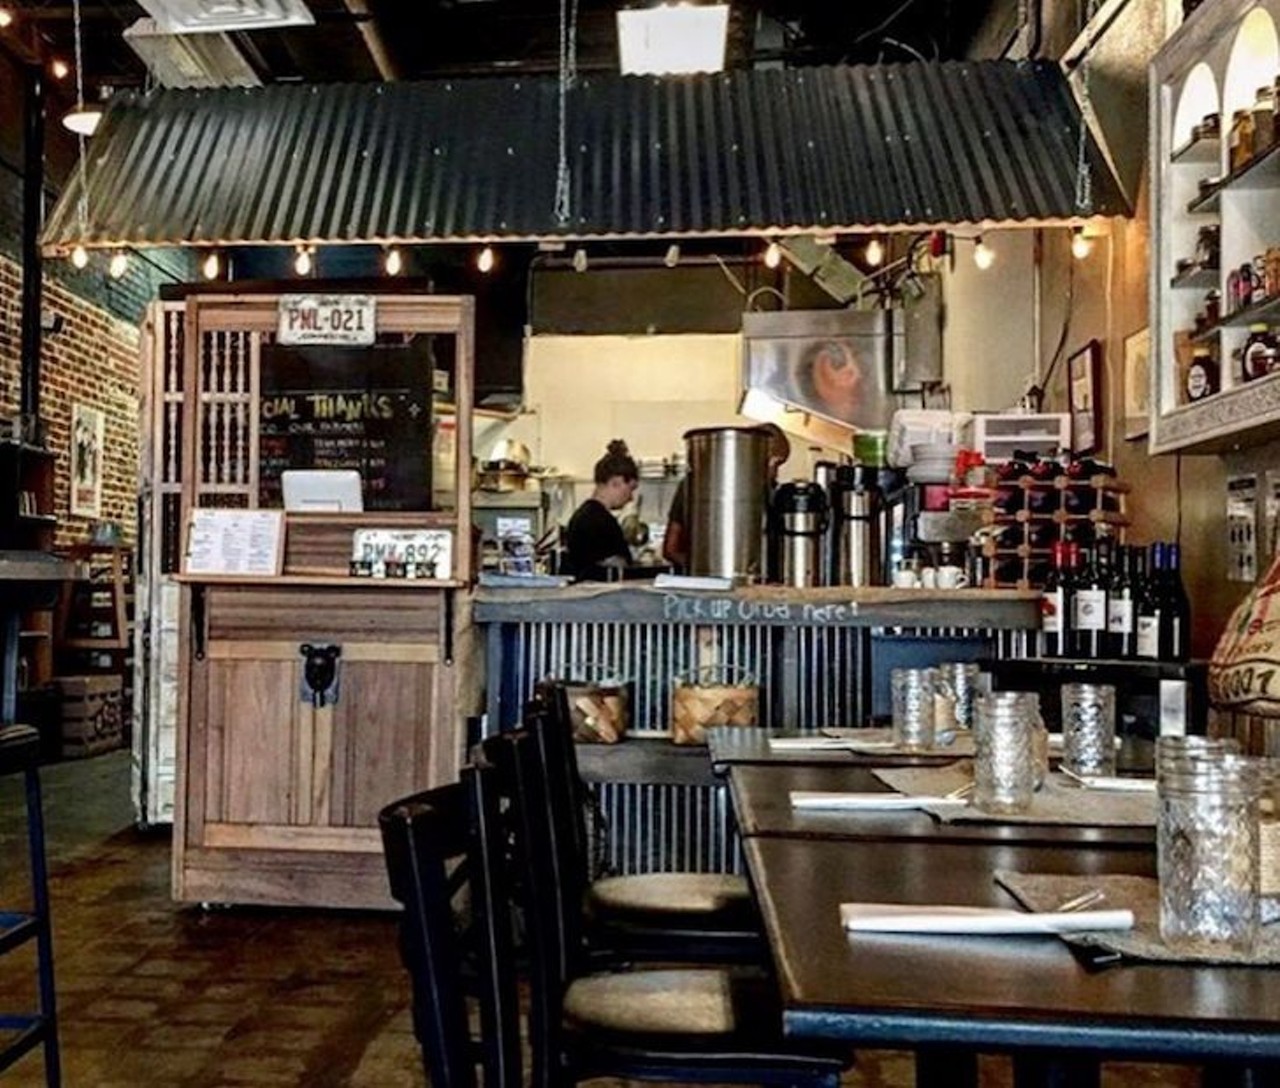 The Tennessee Truffle
125 W. First St., Sanford, 407-942-3977
This breakfast-and-lunch restaurant gives Southern staples a new twist and introduces Sanford to the delicious secrets of pickled ramps. 
Photo via thetennesseetruffle/Instagram